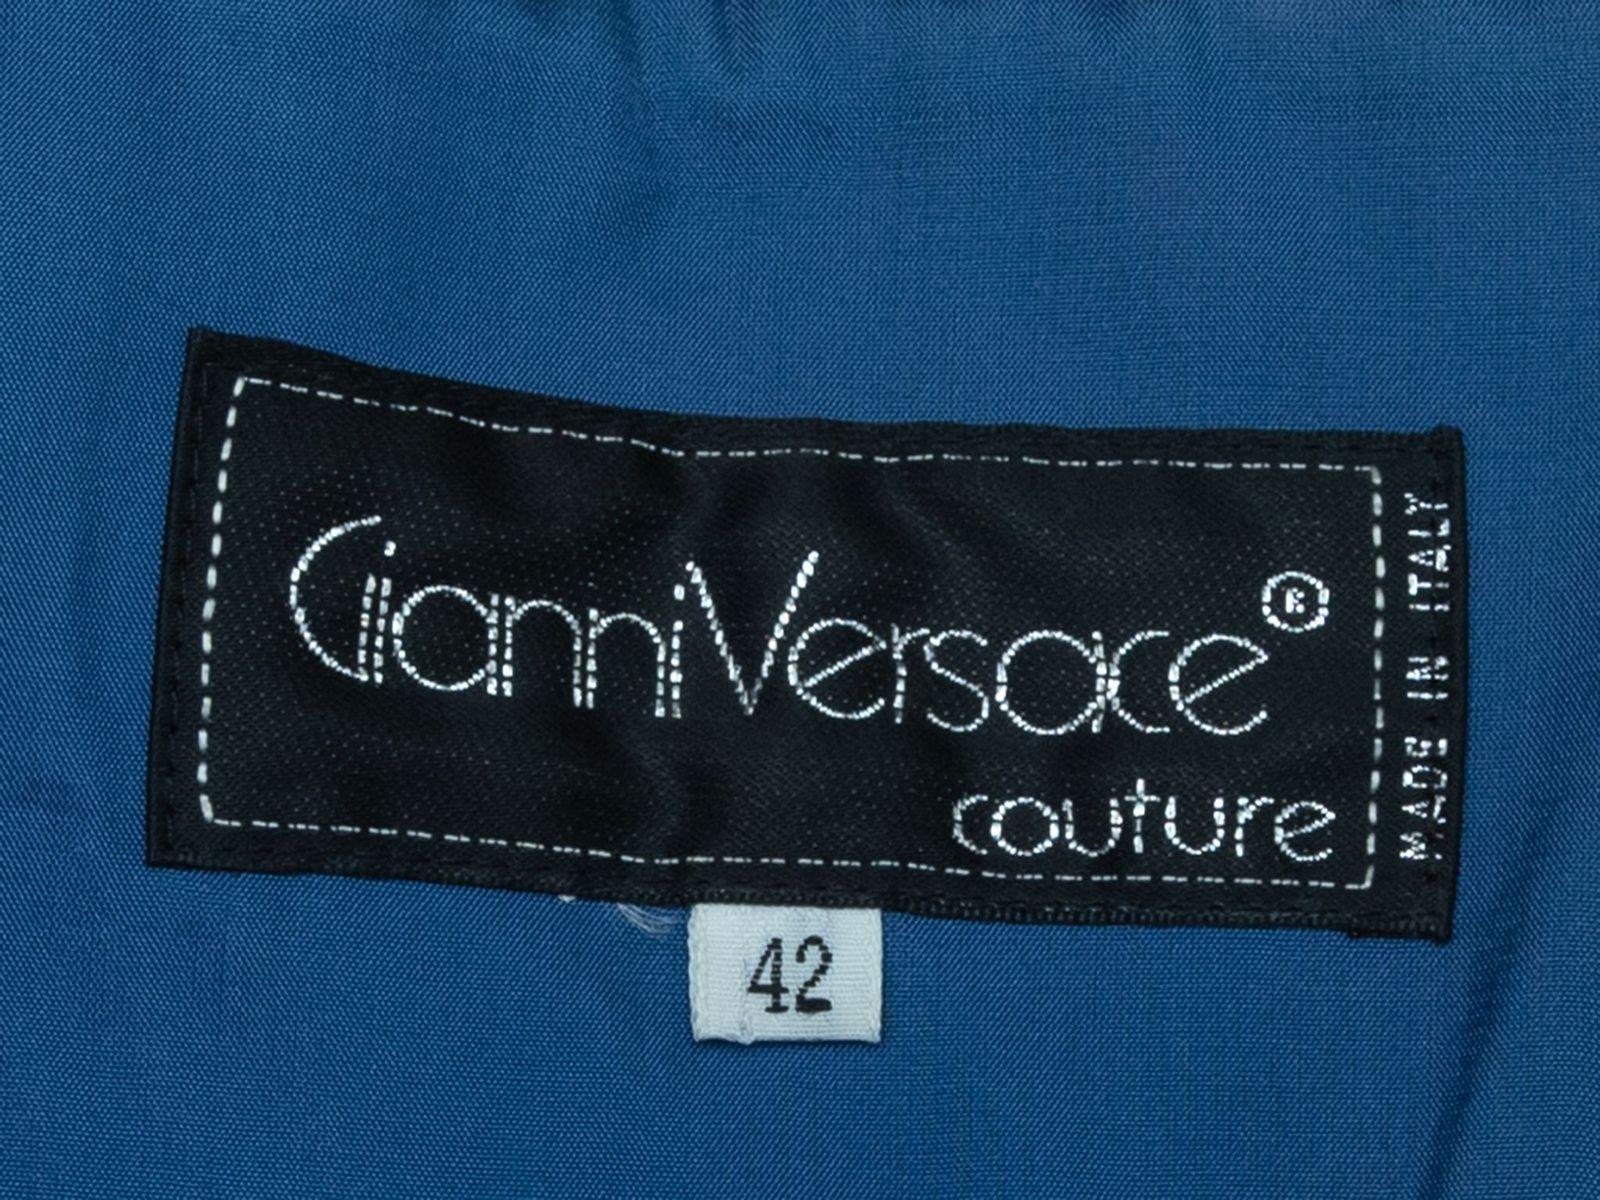 Product Details: Vintage blue strapless top by Gianni Versace. V-neck featuring ribbed texture. Zip closure at side. Designer size 42. 28